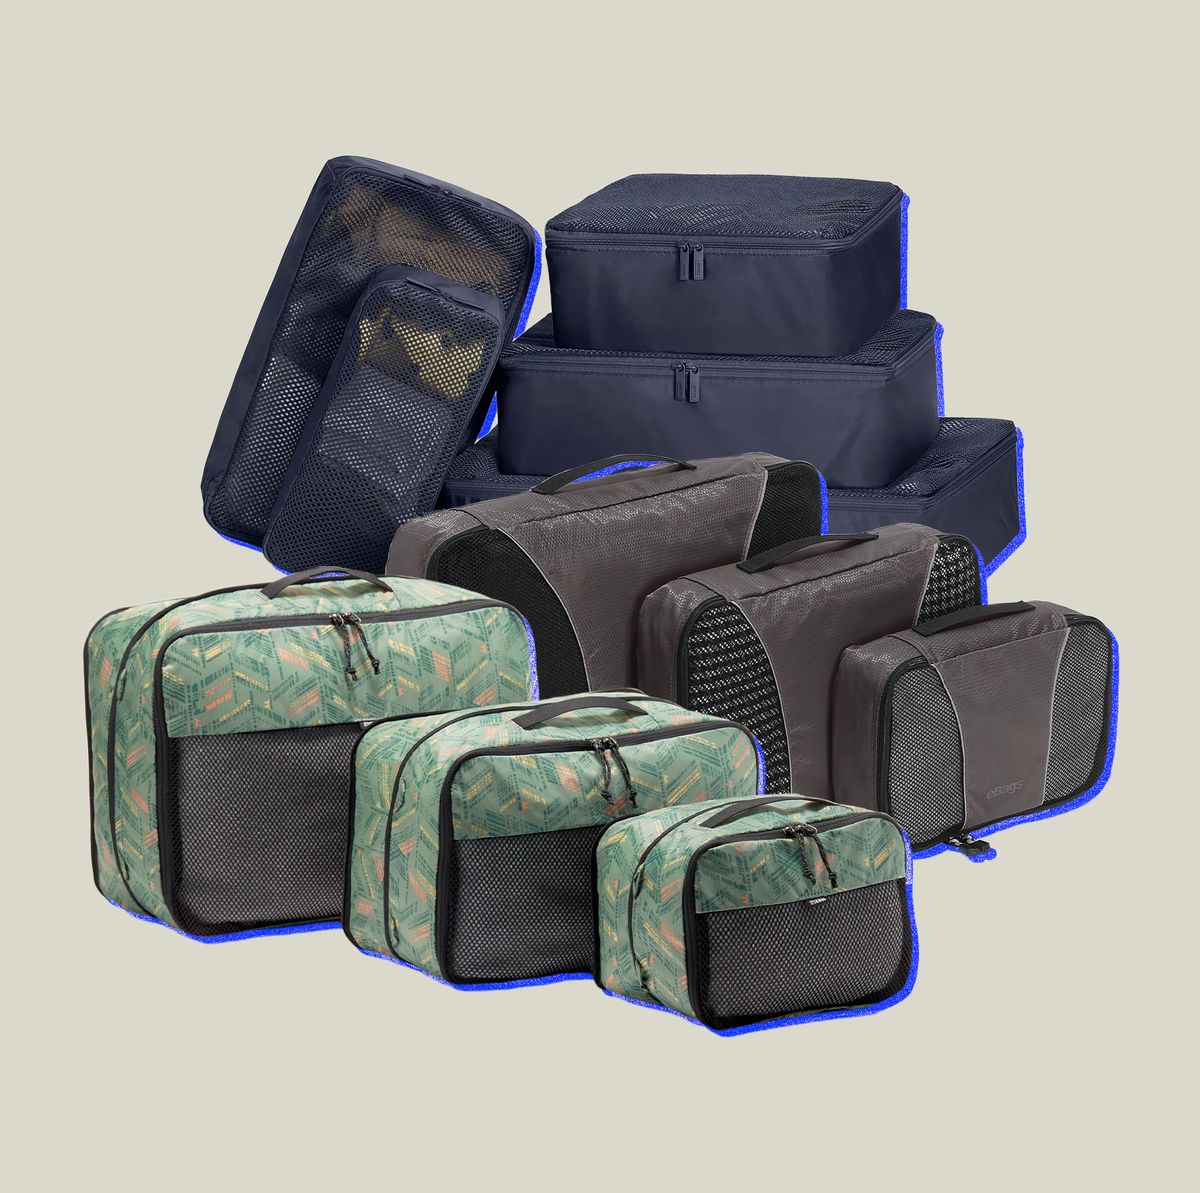 Best Packing Cubes for Travel: Shop Packing Cubes for Organization